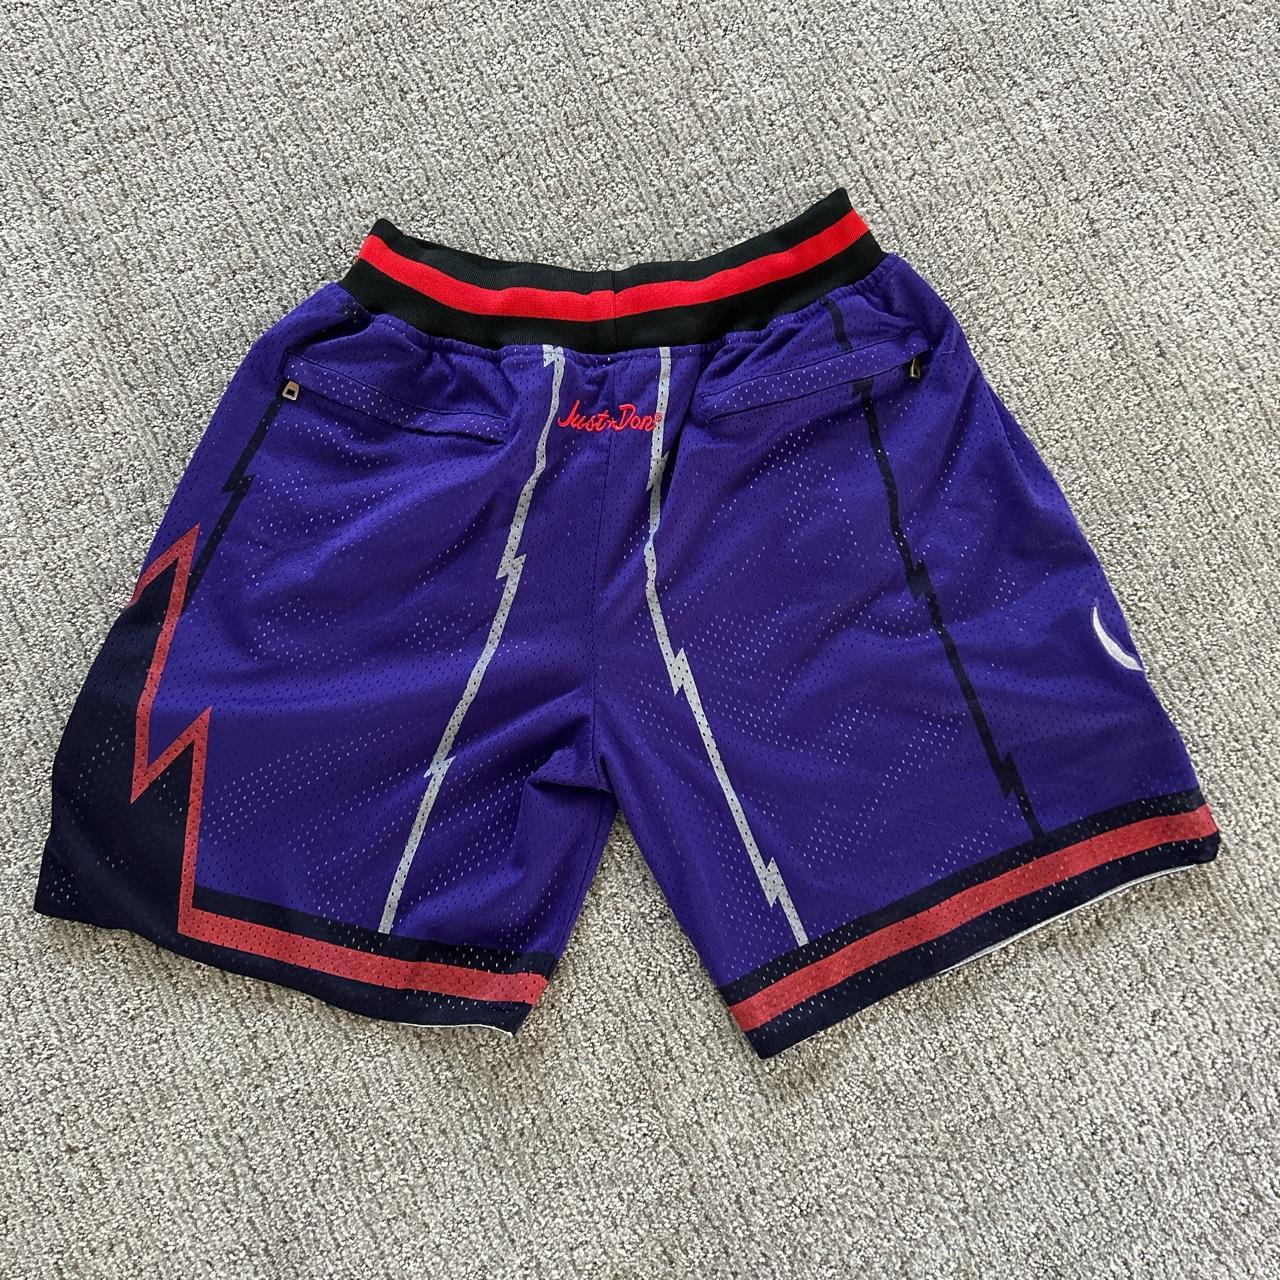 Toronto Raptors 1990's Throwback Shorts w/ Pockets (Purple) - Mens L for  Sale in Los Angeles, CA - OfferUp